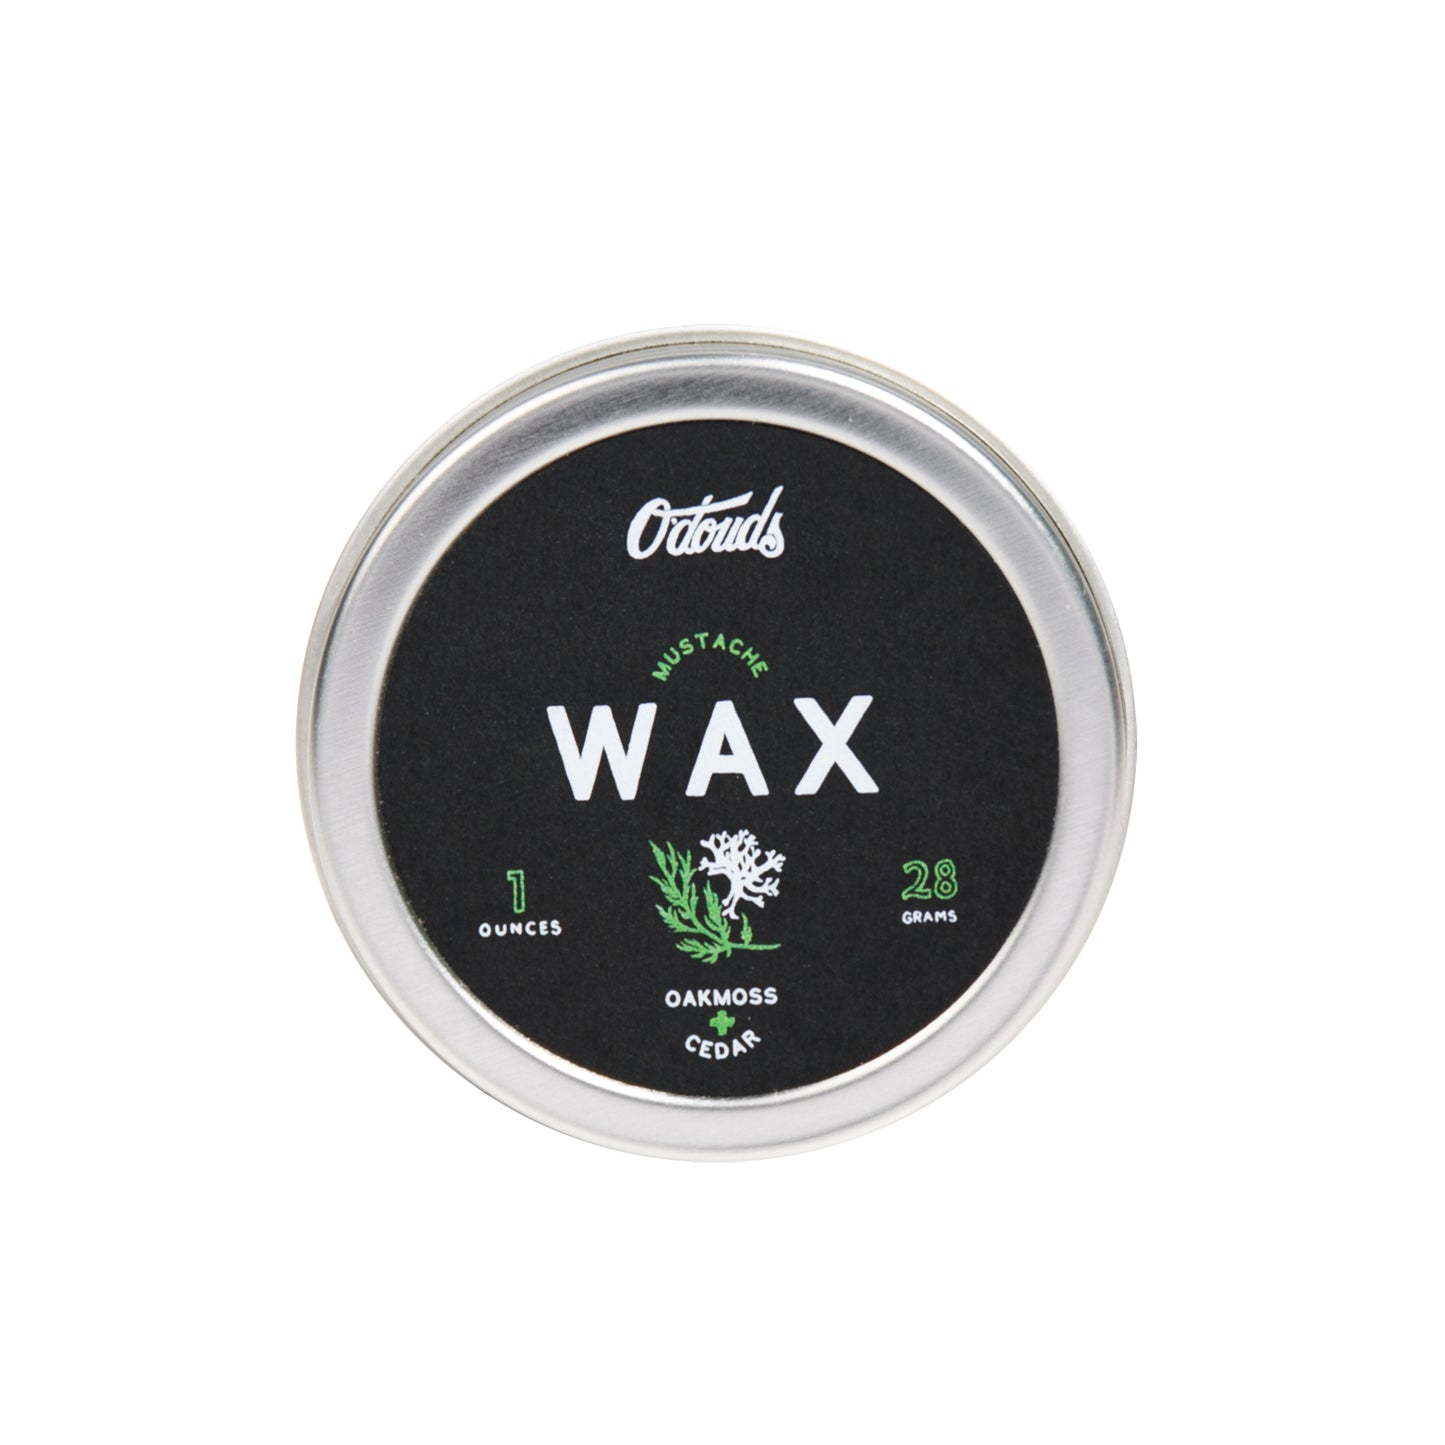 Primary image of Mustache Wax